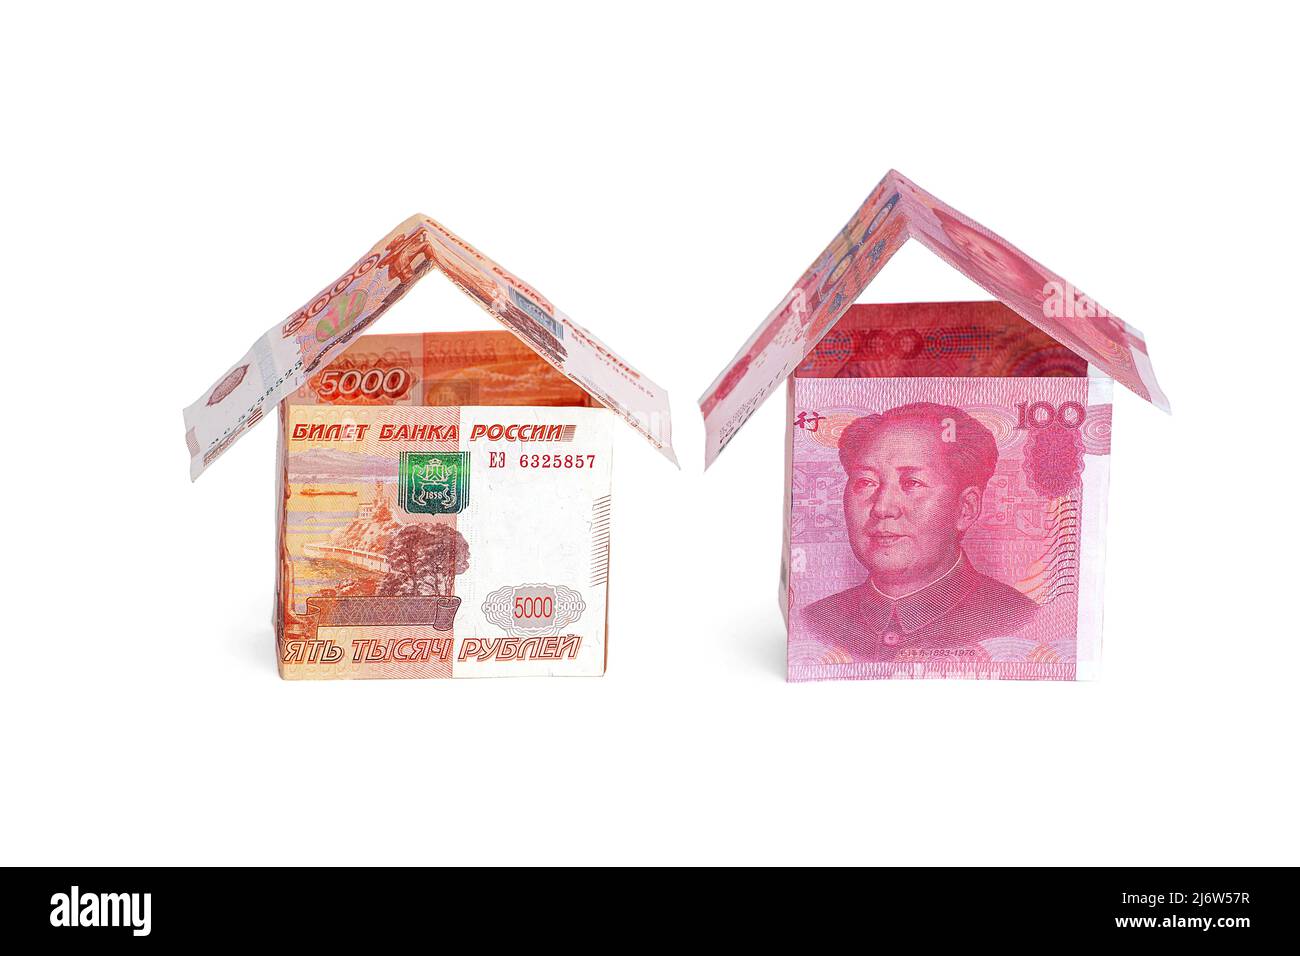 Money houses made of rubles and yuan, isolated on a white background Stock Photo